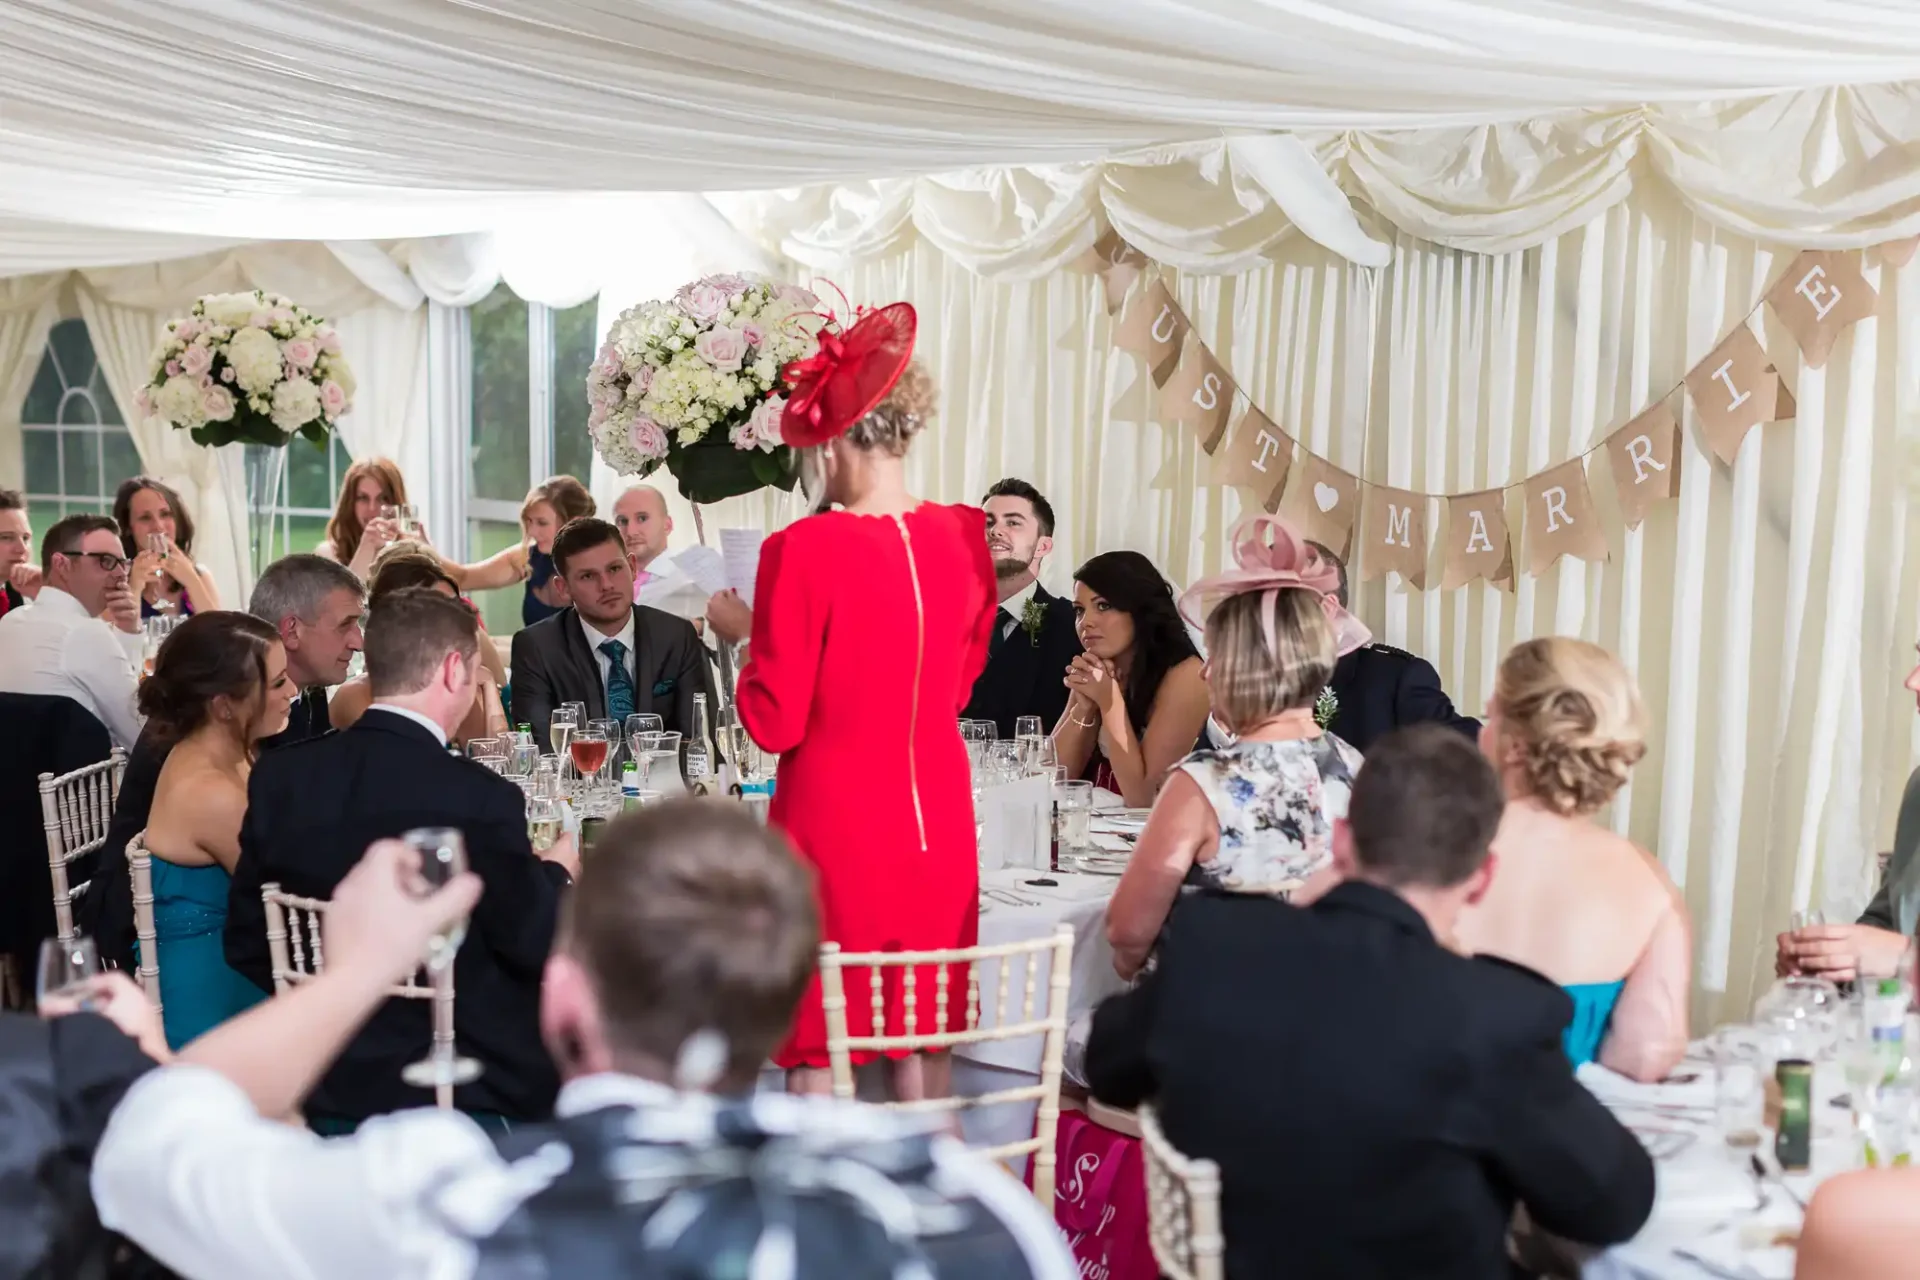 A woman in a red hat makes a speech at a wedding reception inside a tent adorned with "just married" banners, as guests listen attentively.